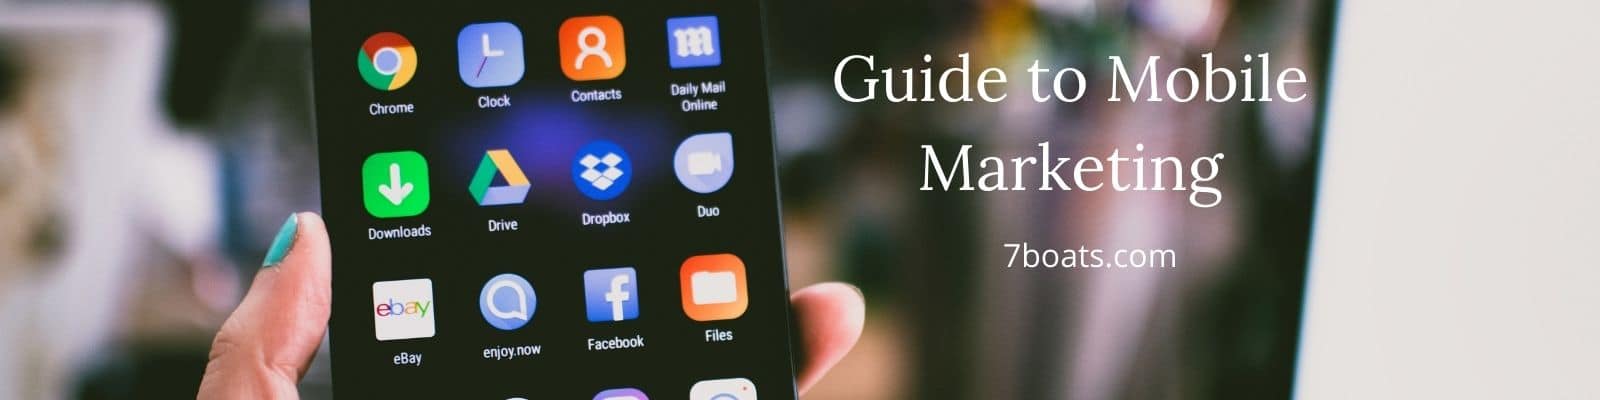 Guide to Mobile Marketing – Mobile App Development, Mobile Responsive Websites & Mobile Searches